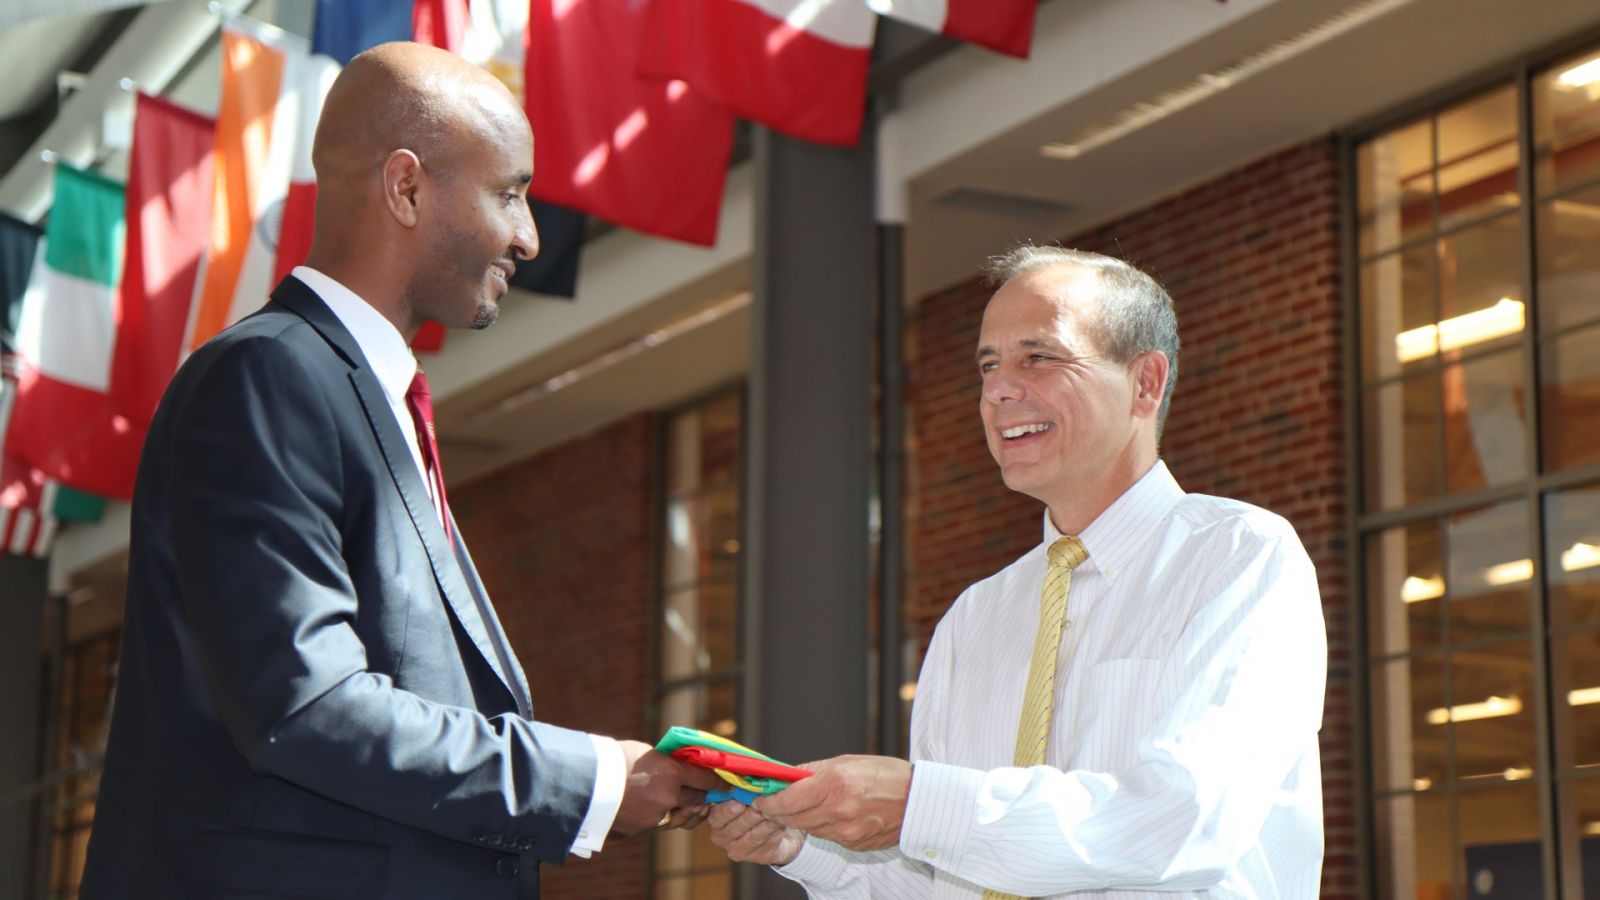 Dawit Lemma, founder and CEO of Krimson Aviation, presents the Ethiopian flag to Tom Frooninckx, interim head of Purdue’s School of Aviation and Transportation Technology, for Purdue’s Niswonger Aviation Technology Building to commemorate the scholarship announcement. (Purdue University photo/John O'Malley) (Download full-size photo in the Media Kit, below.)